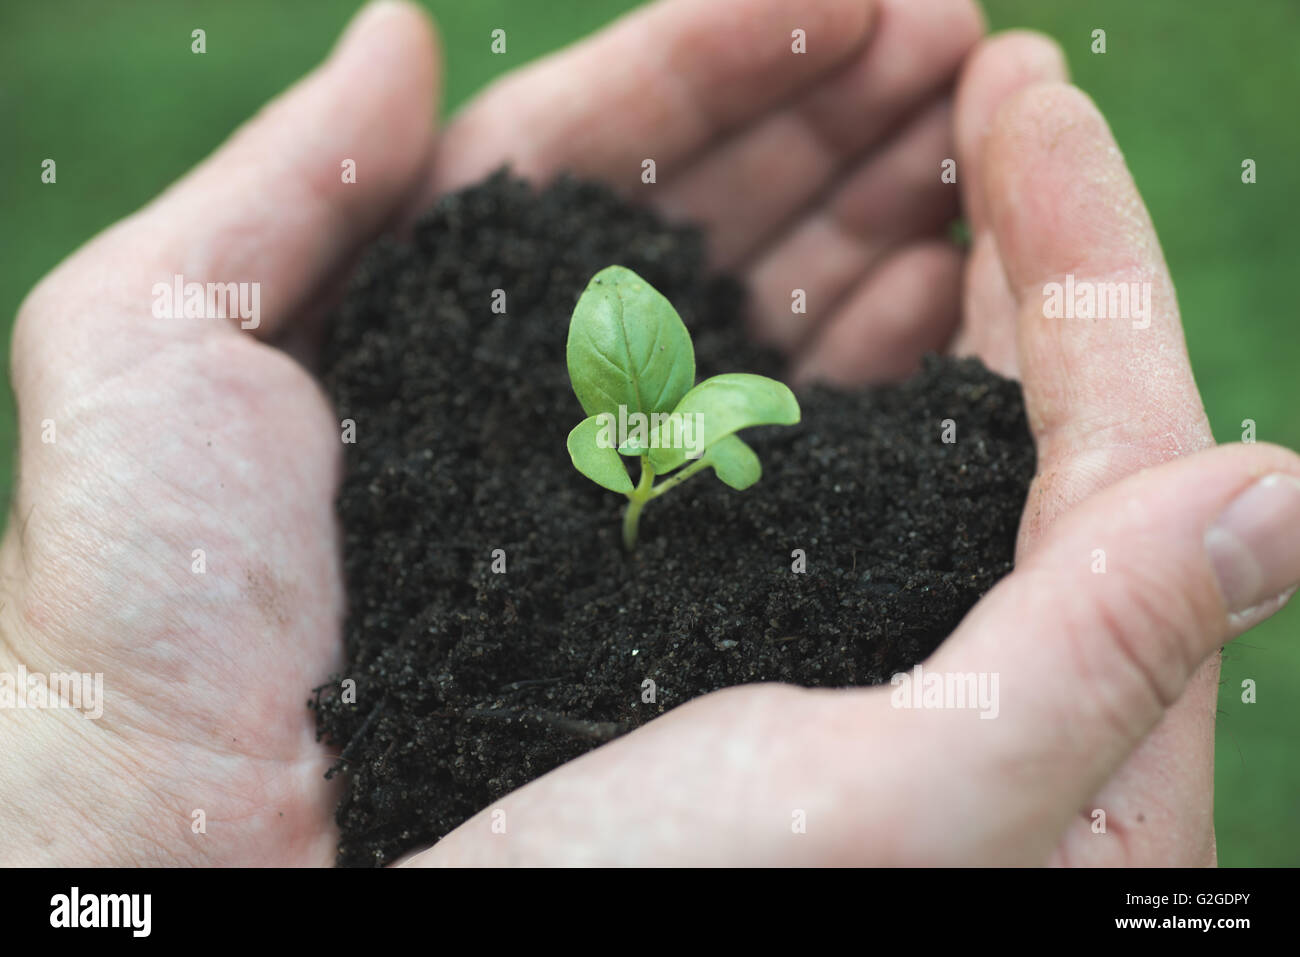 man's hands holds heart shape soil with bud Stock Photo